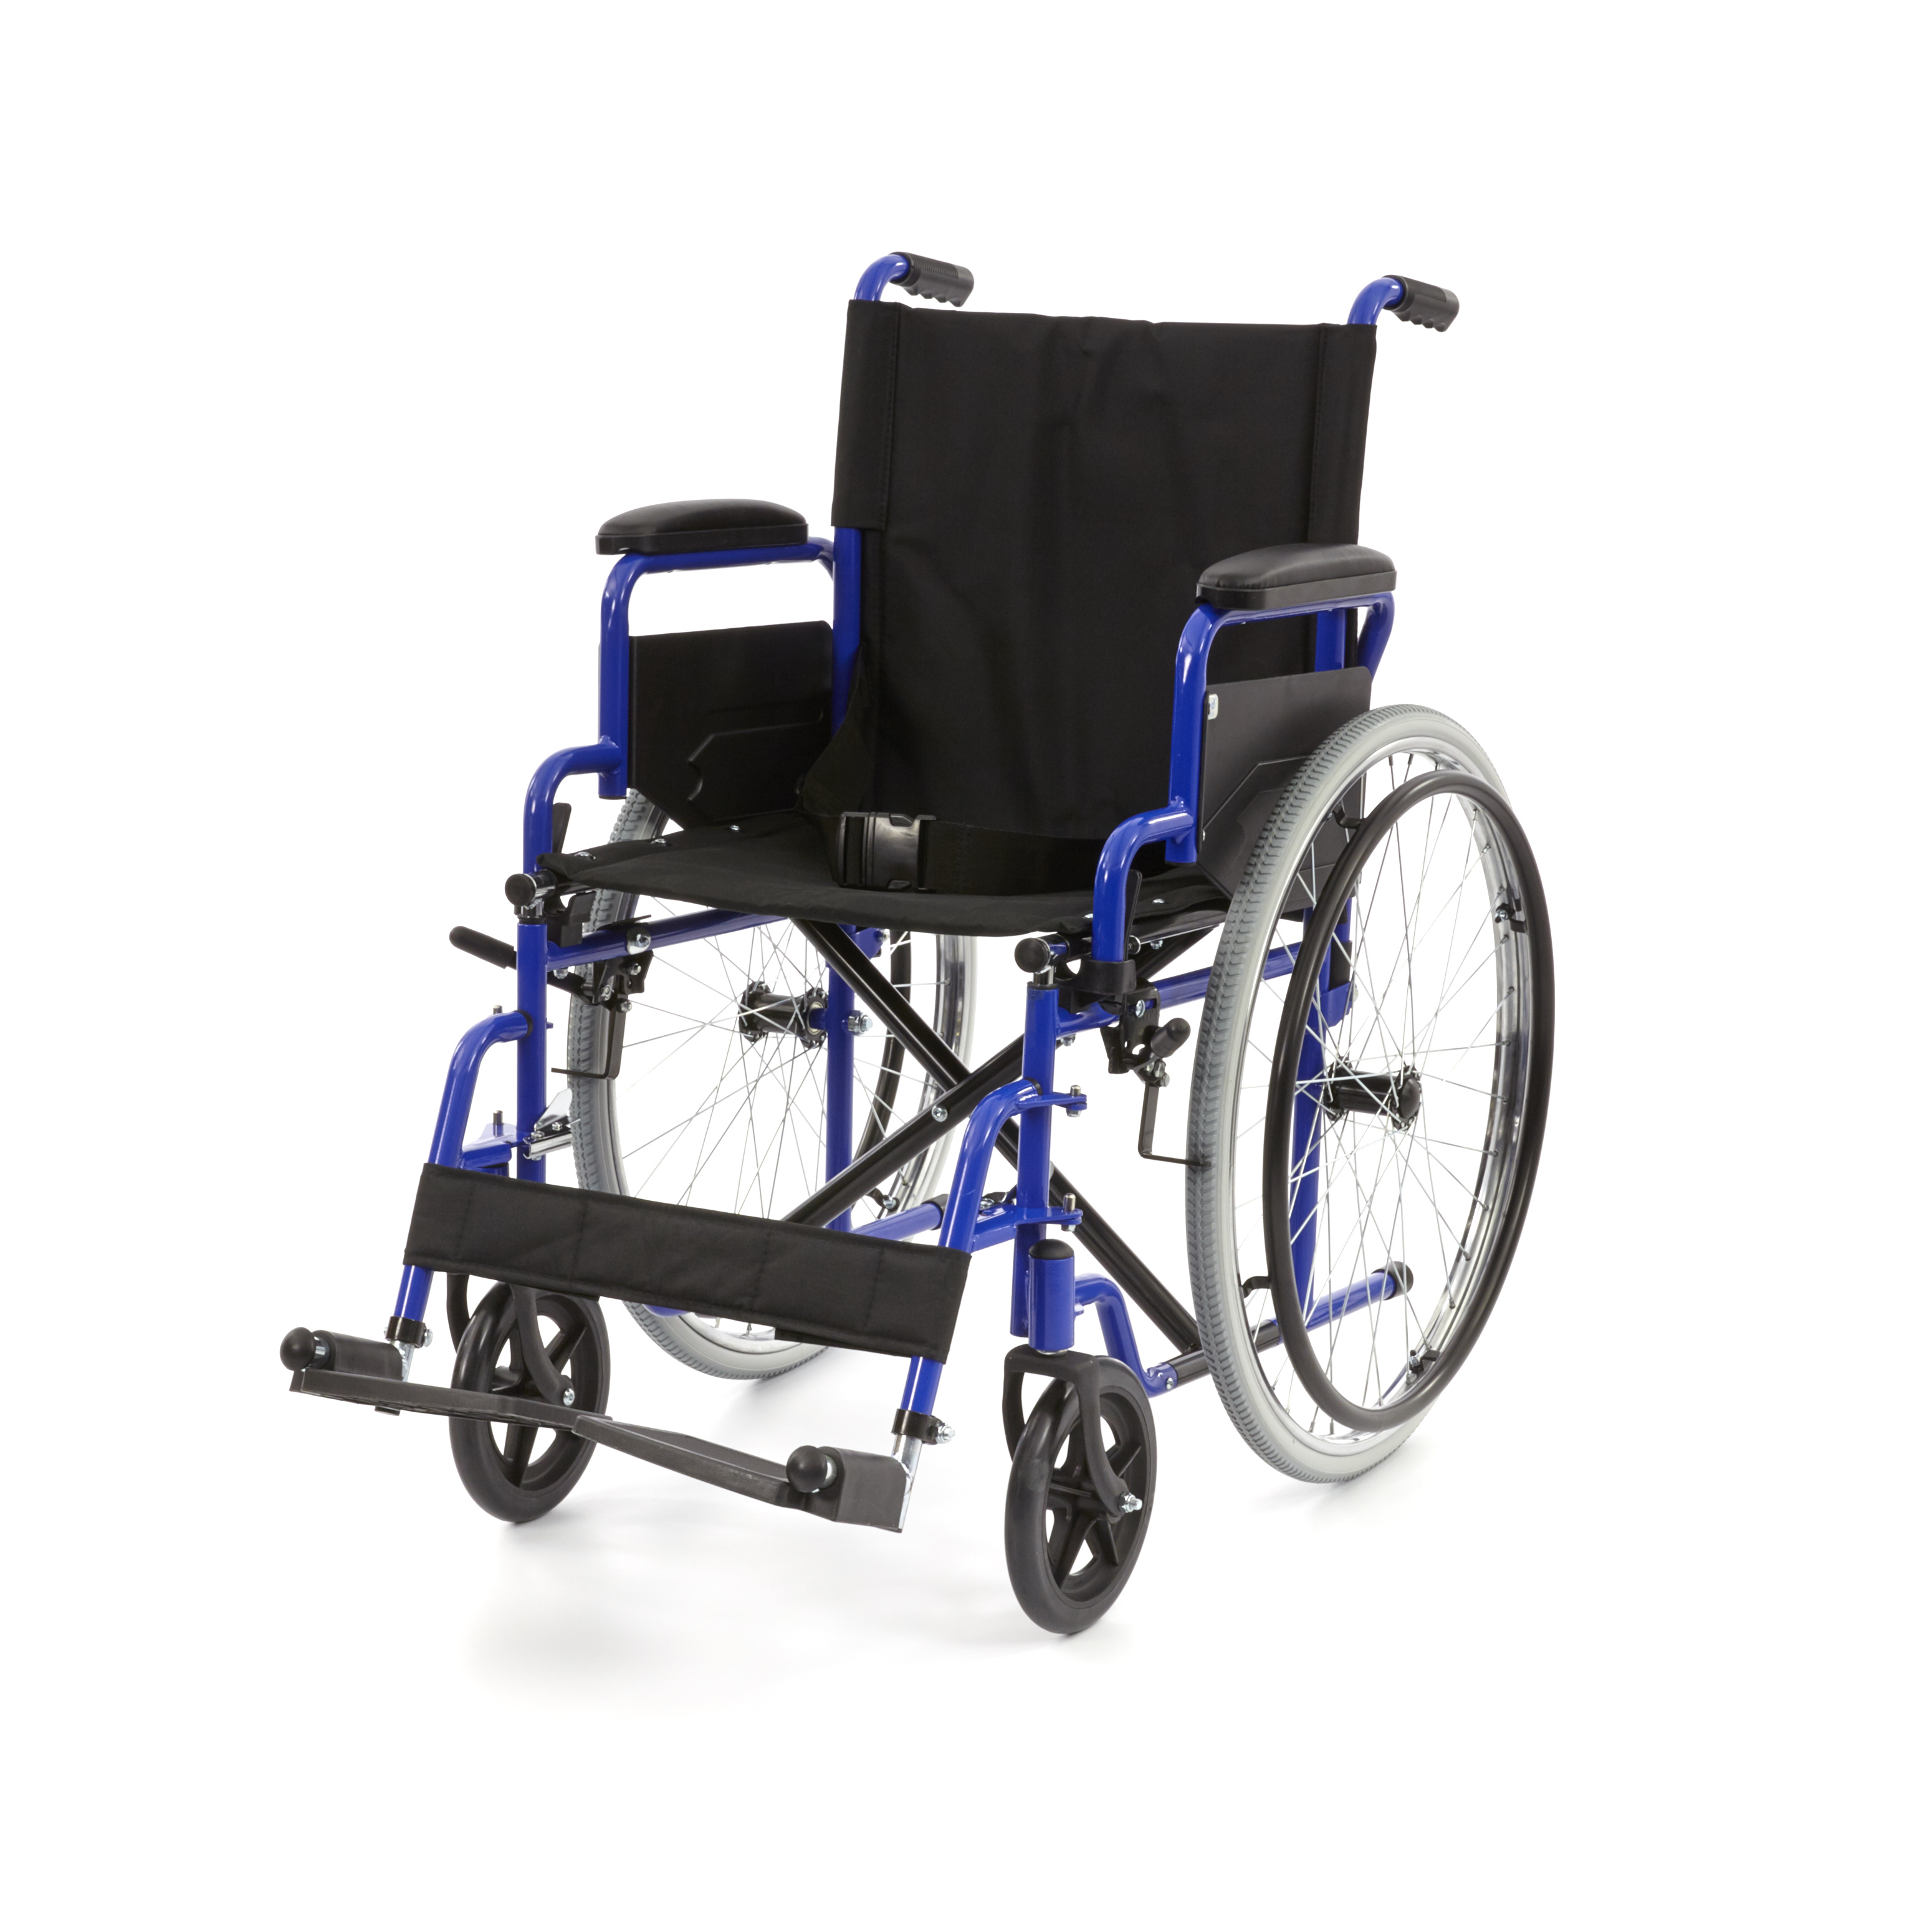 WHE-01-BLUE Romed foldable manual wheelchair with flip-up armrest and swing away footrest.